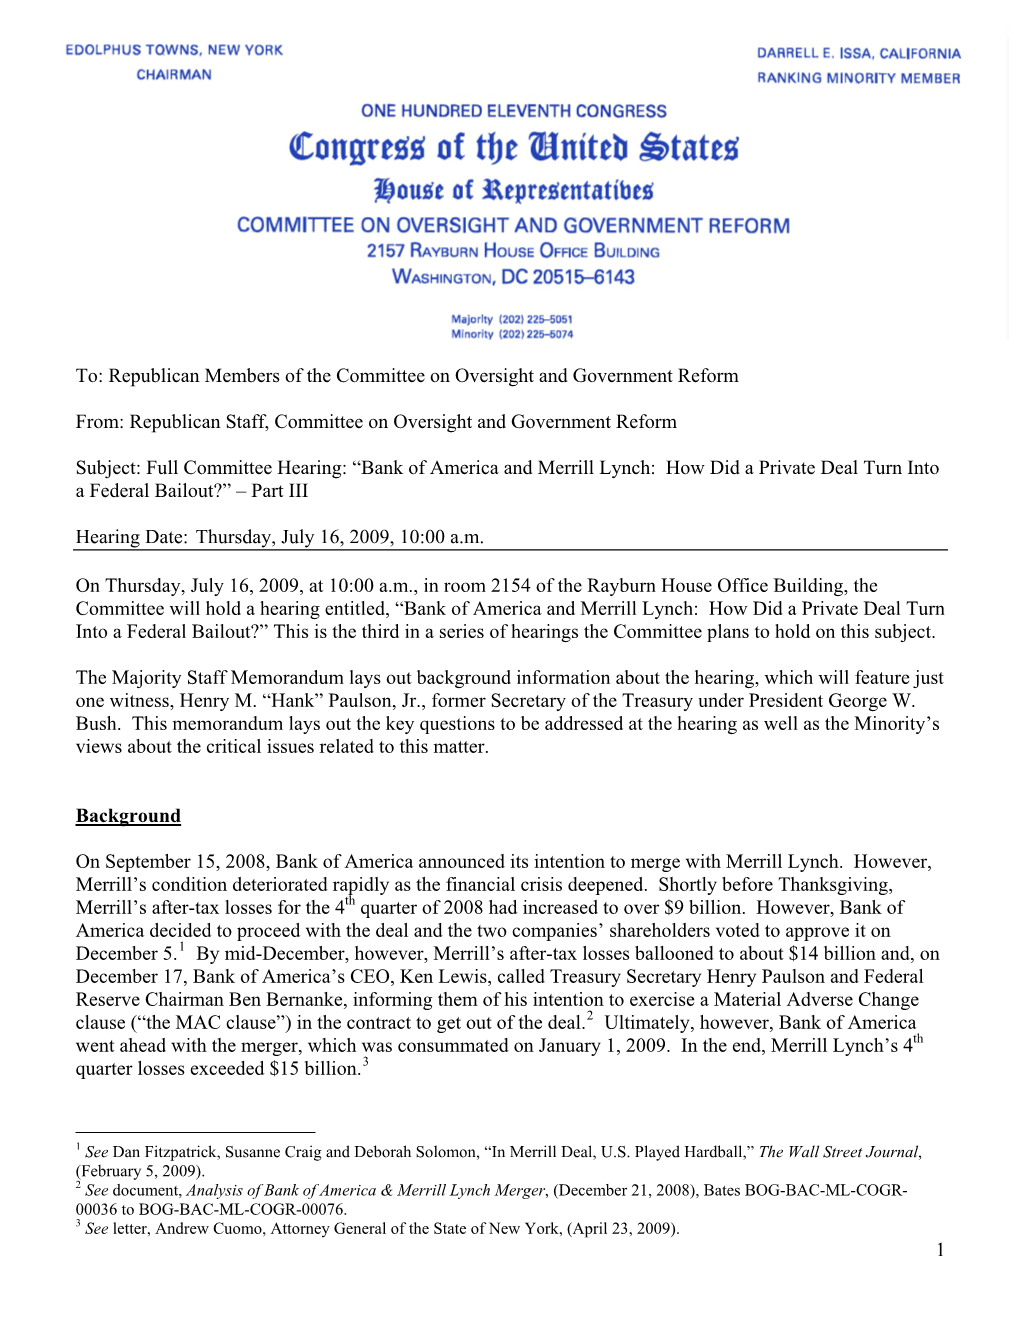 Republican Staff, Committee on Oversight and Government Reform